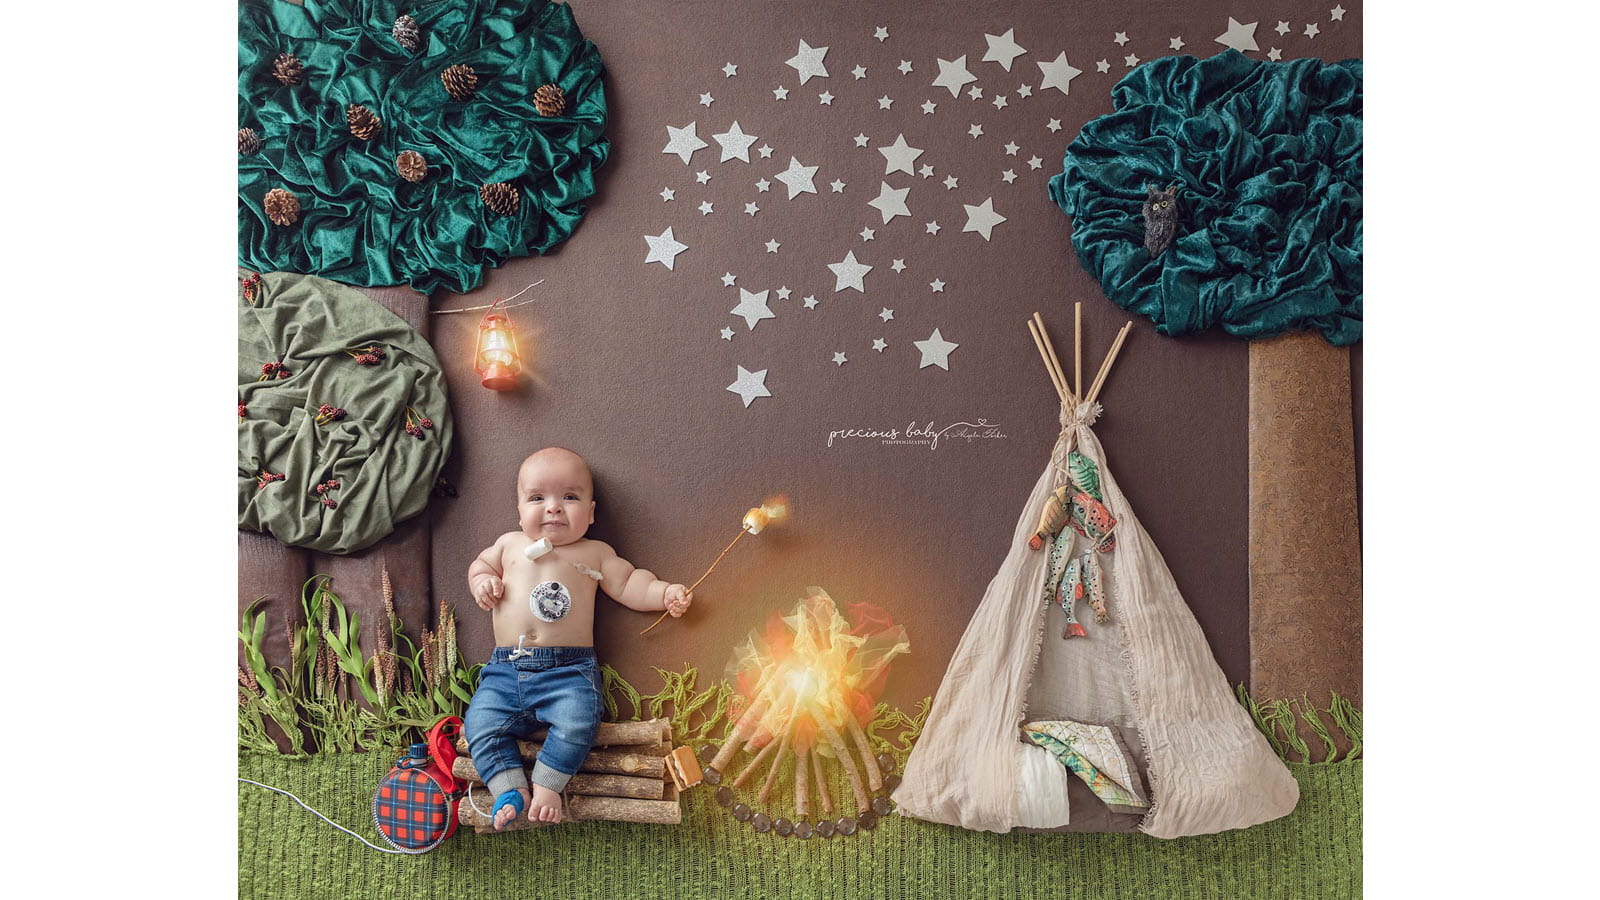 Baby wearing jeans toasts a marshmallow in a whimsical camping scene